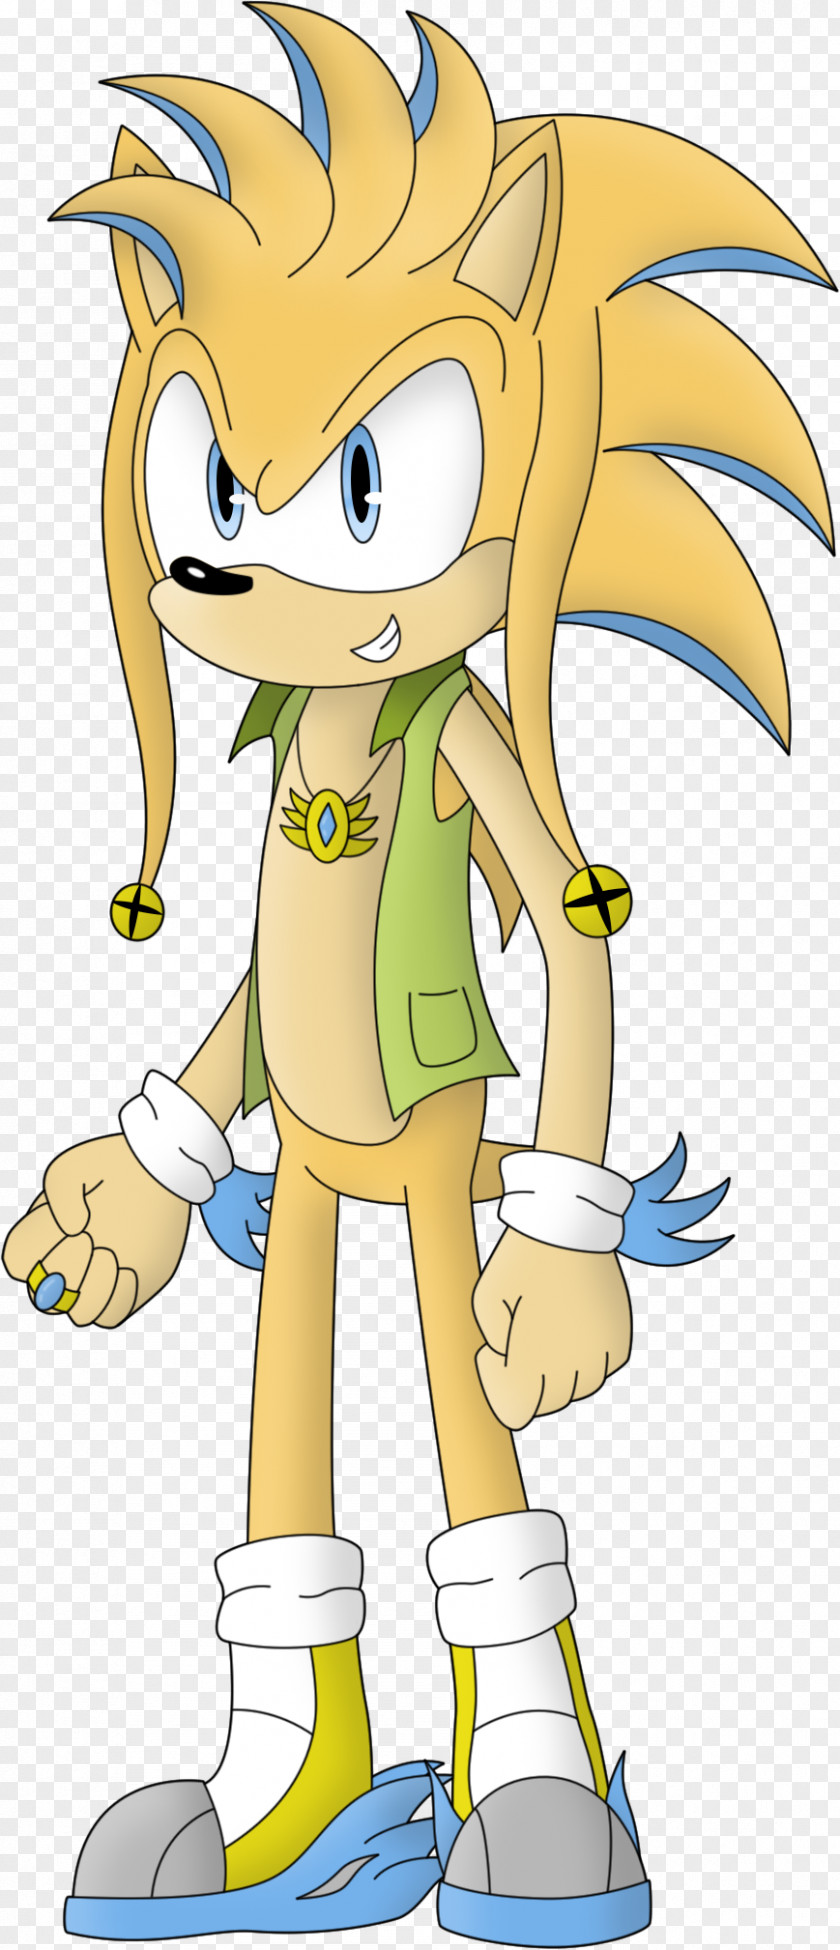 Sonic The Hedgehog Fiction Work Of Art Character PNG